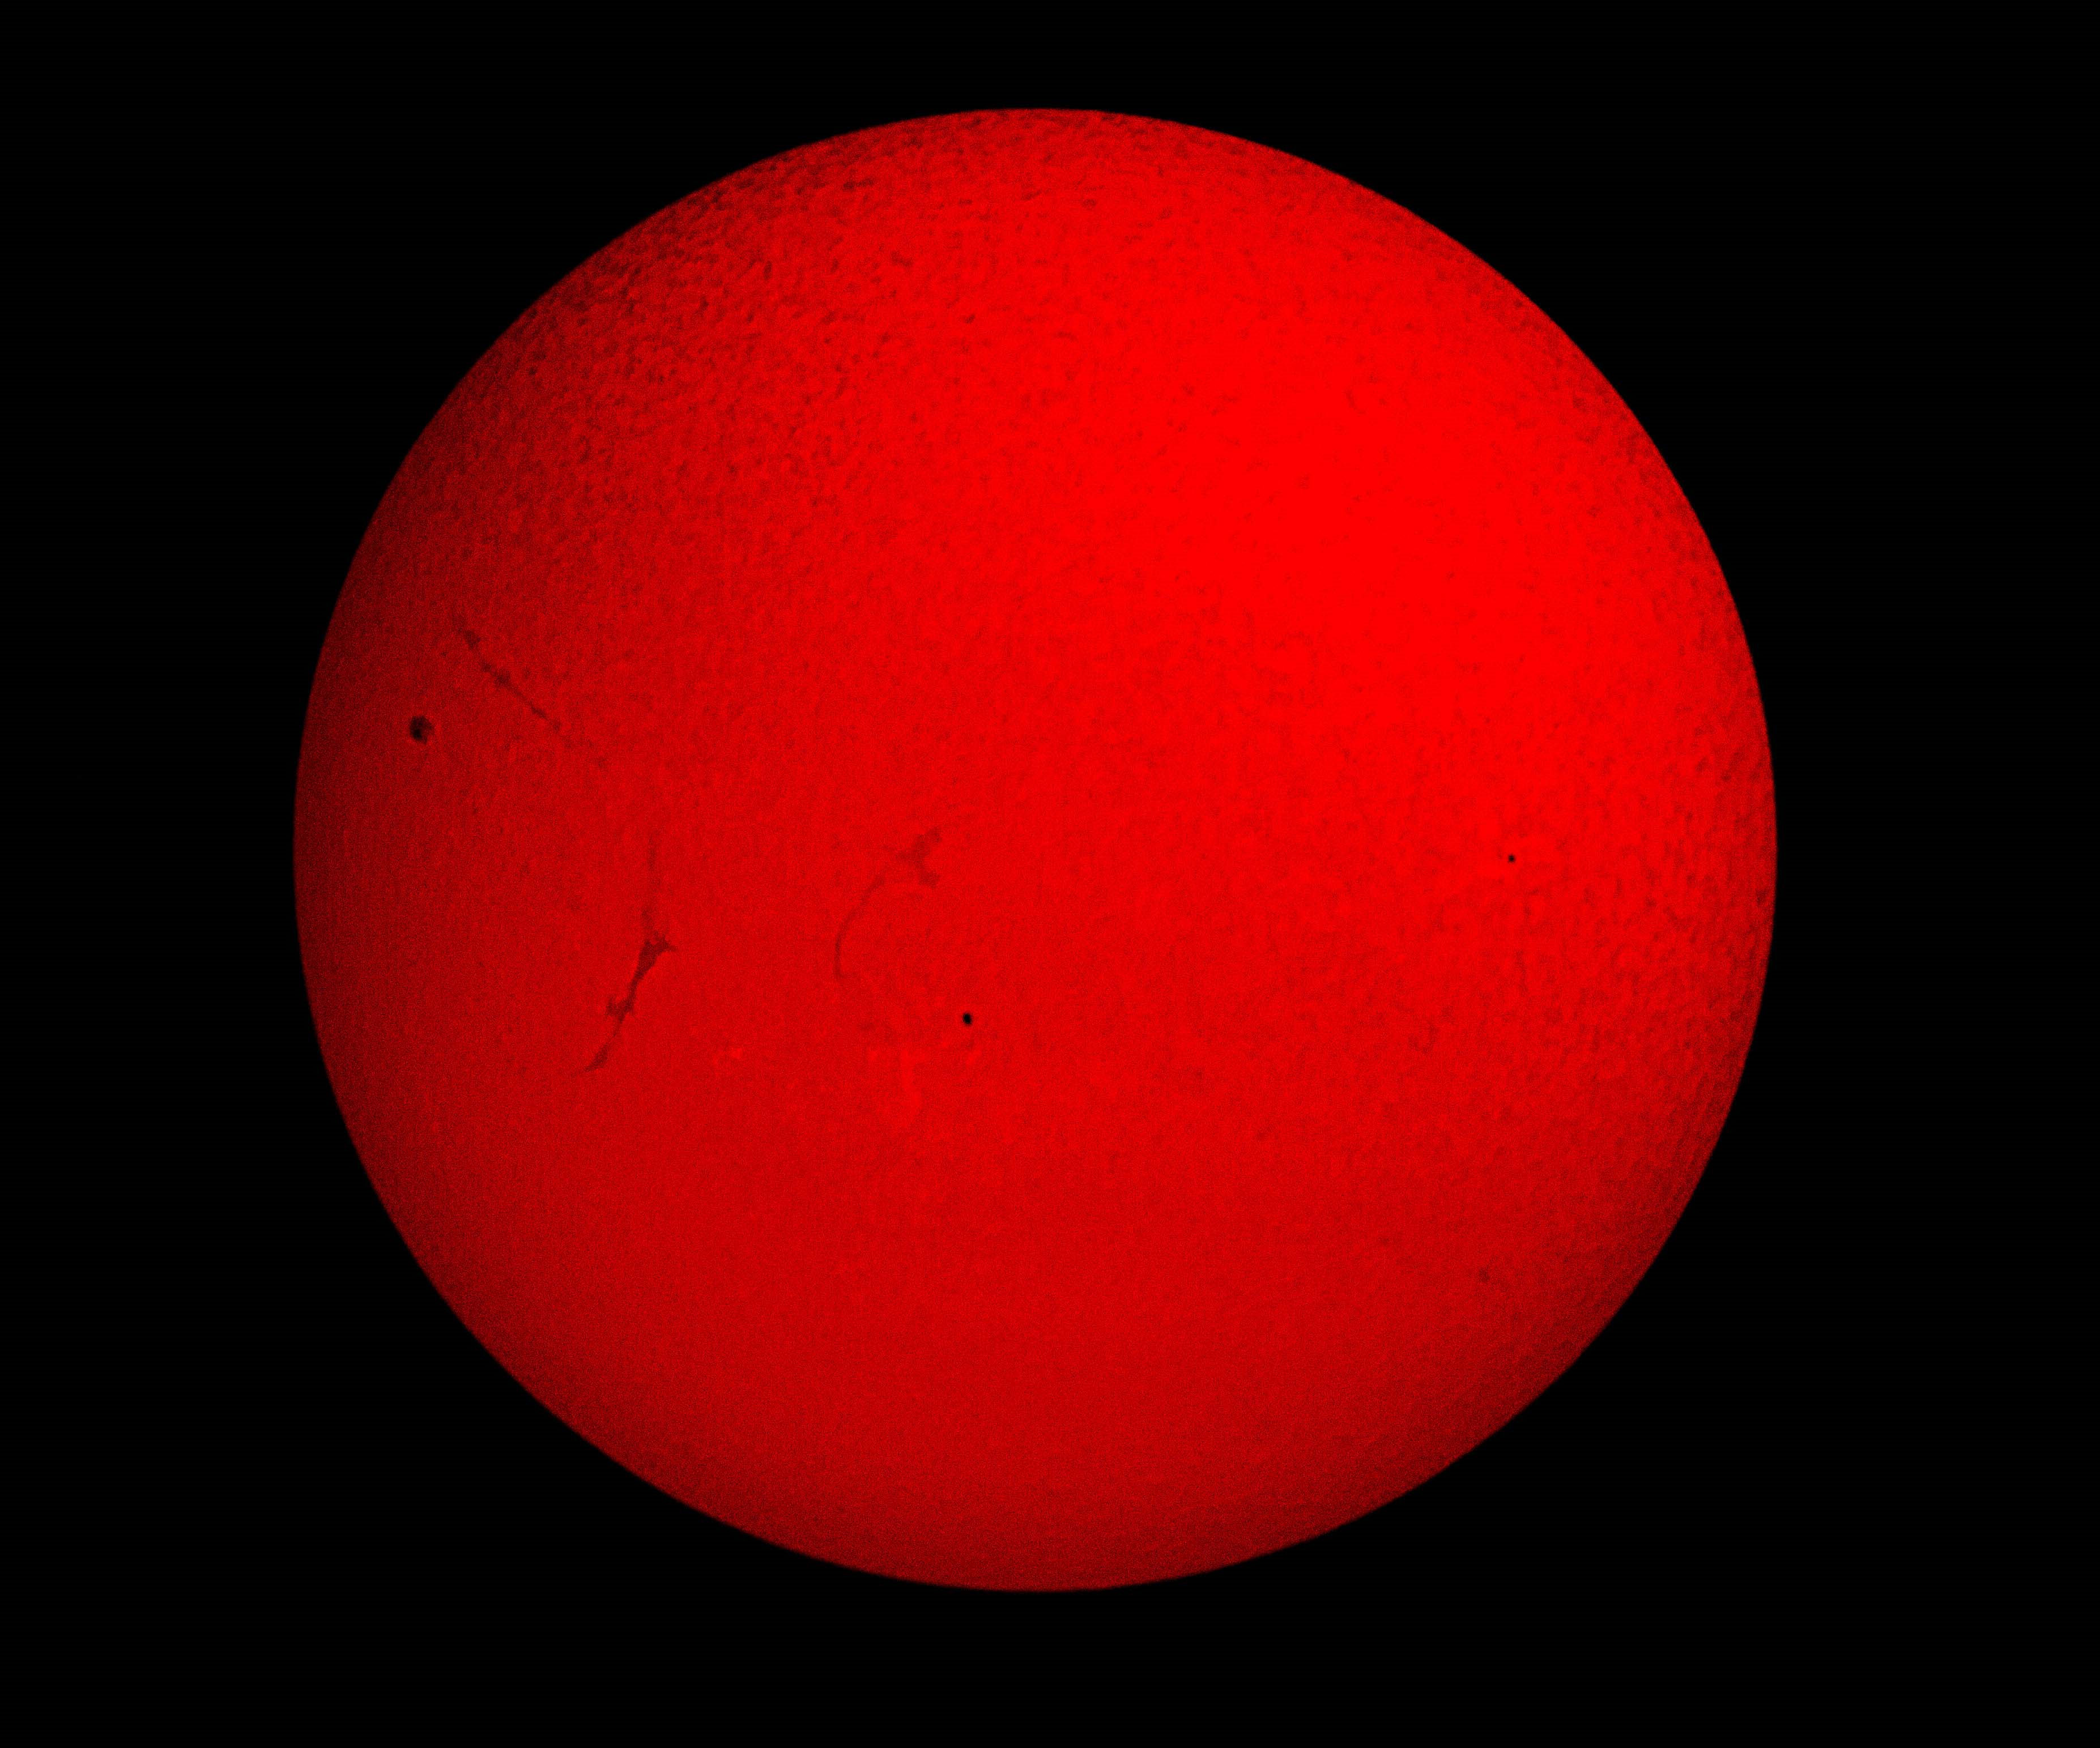 Sol by Ken Kennedy 18.06.17  11.52. Canon EOS 100D, 1/50 second.  ISO-100. This is the first of two images taken through the Society's 50mm Coronado telescope showing spots, filaments and other "surface" detail.